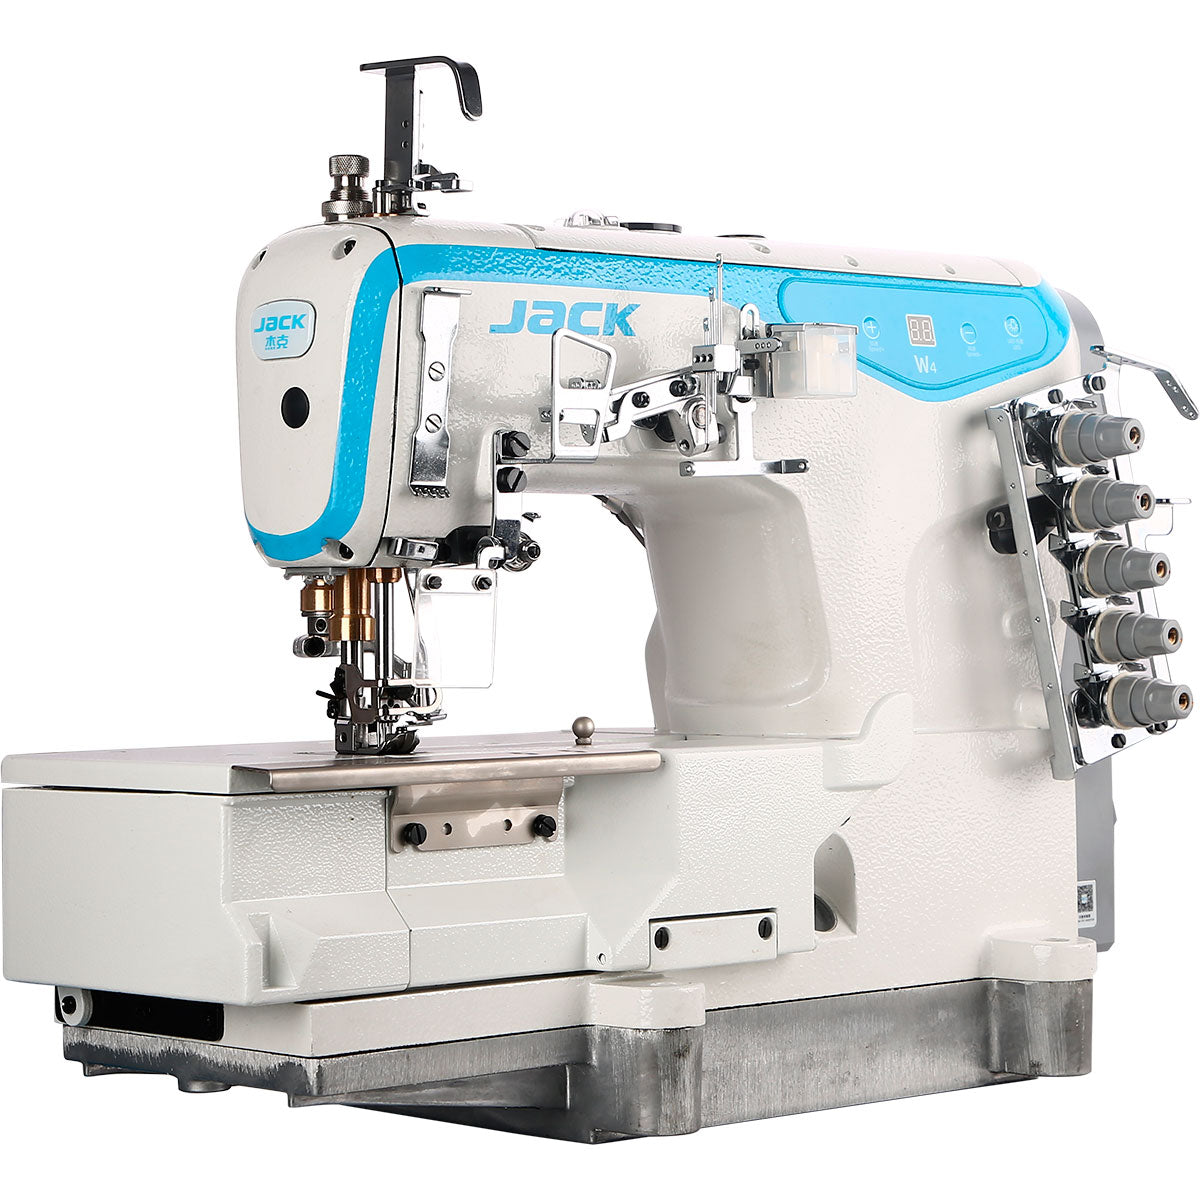 JACK W4-D /01/02/03/08 3 Needle Flatbed Coverstitch Industrial Sewing Machine Assembled with Table and Stand Included